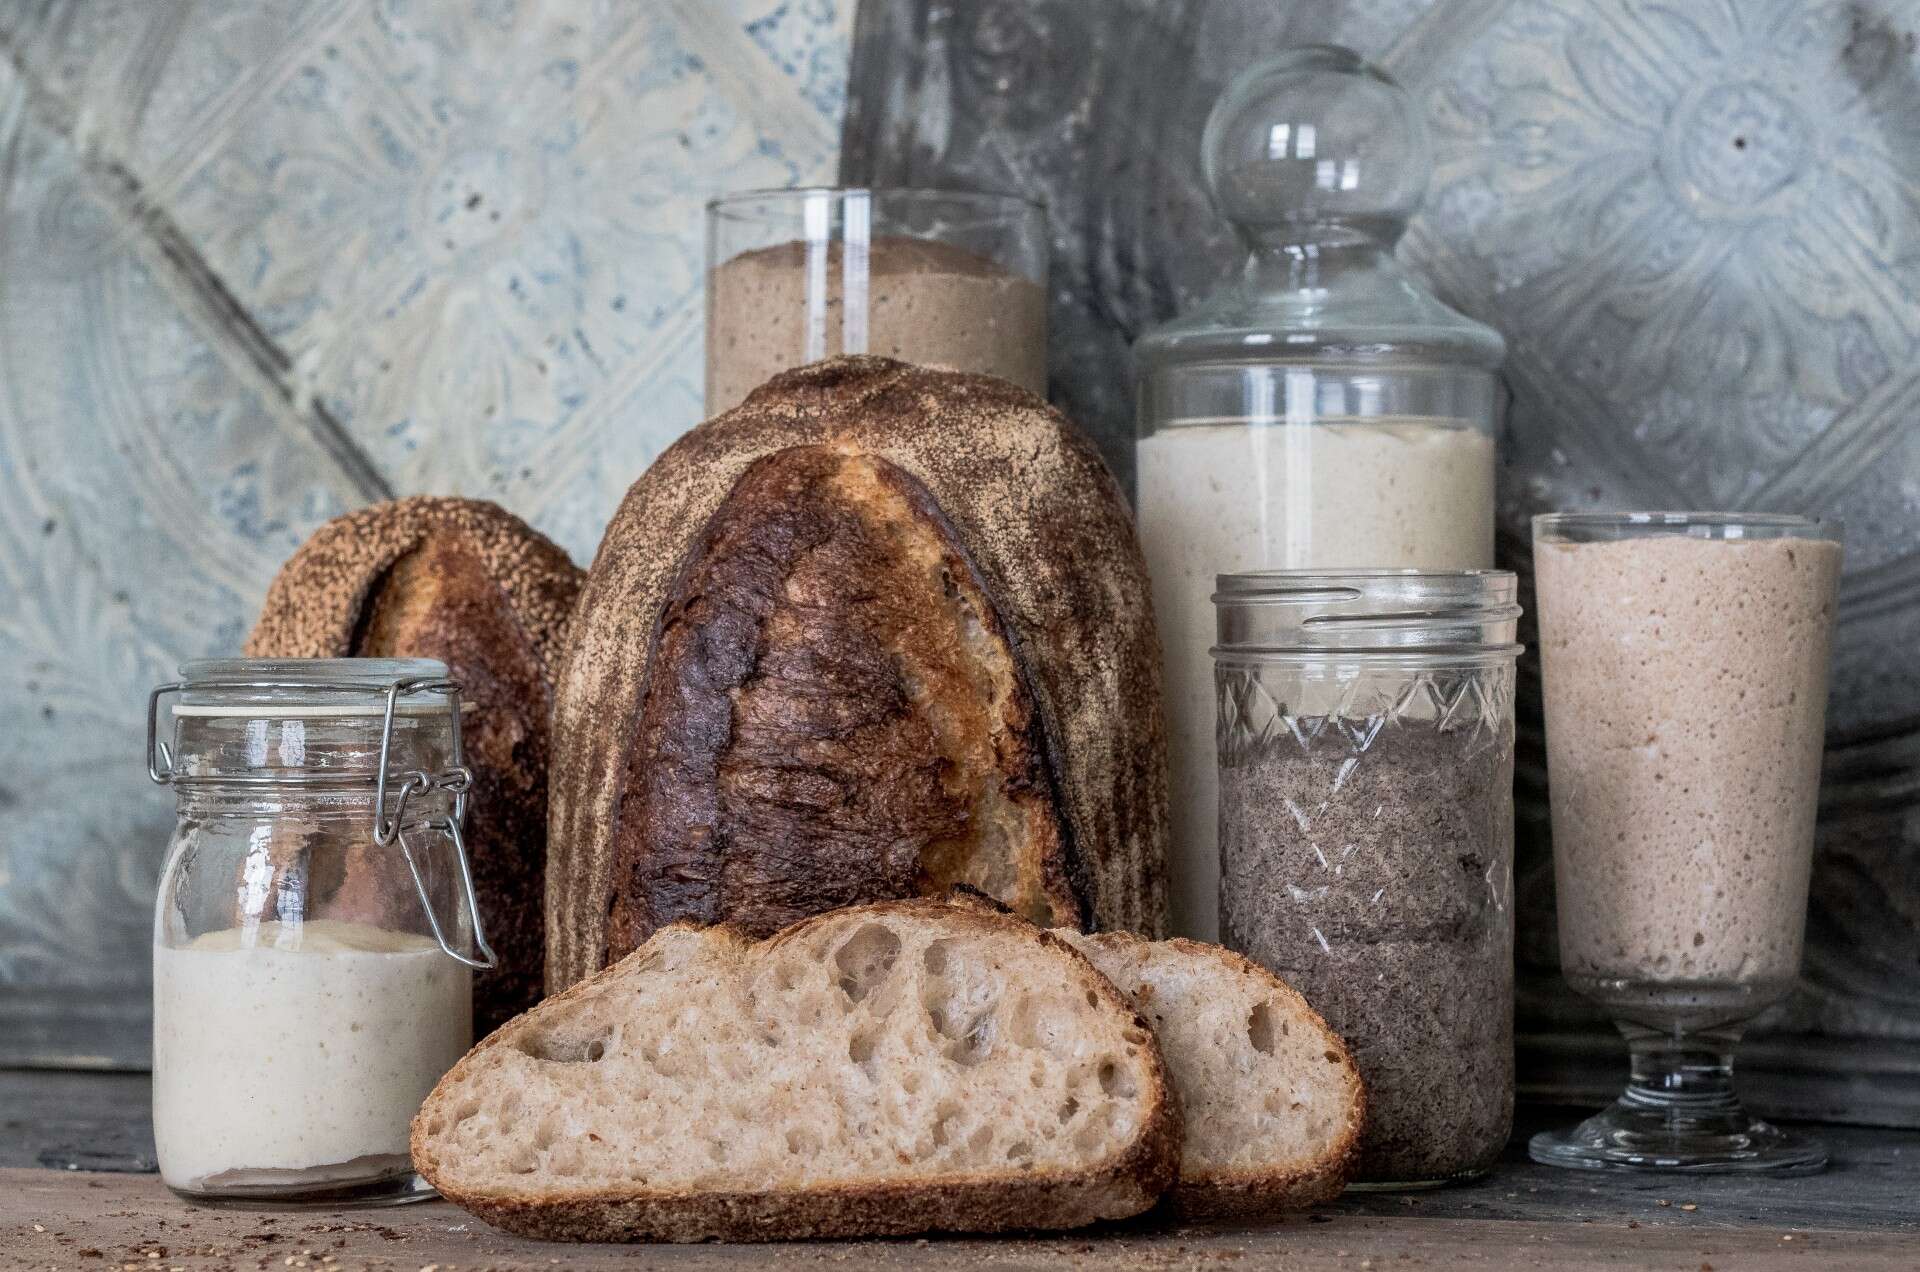 A series of preferments in jars on a table with bread